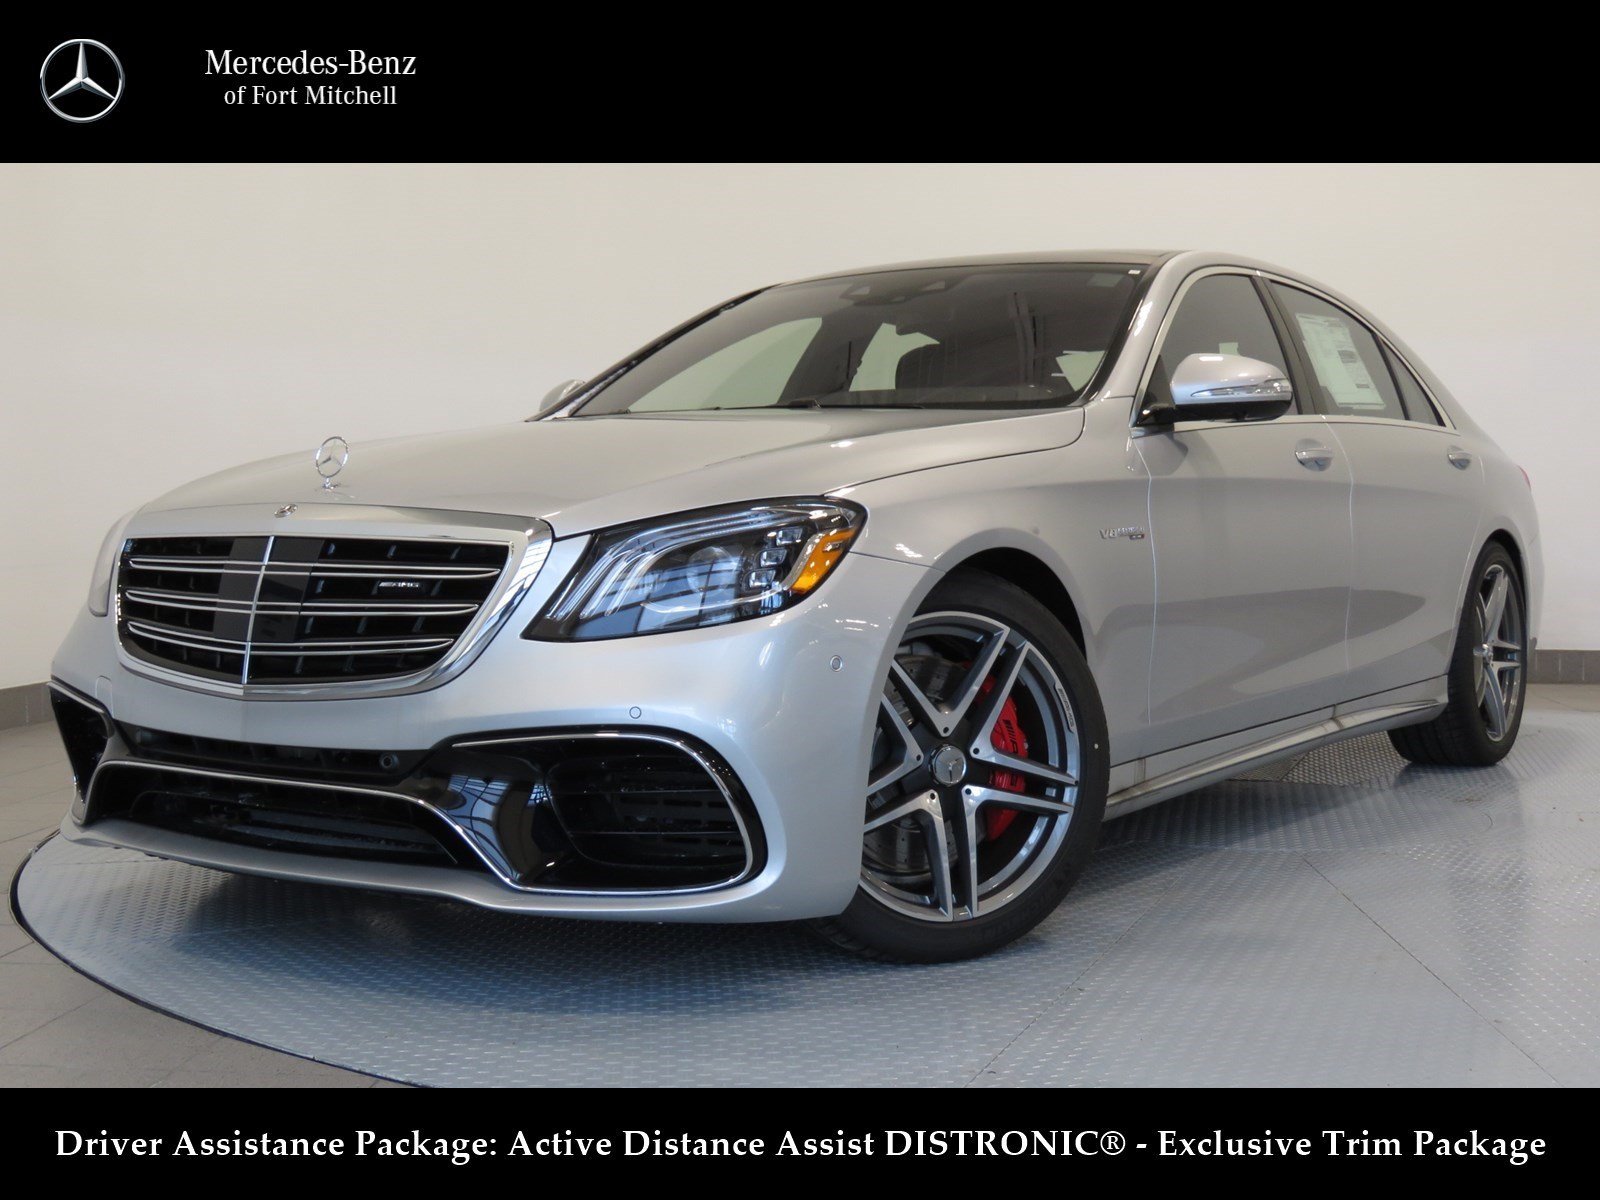 New 2019 Mercedes Benz S Class Amg S 63 Awd 4matic